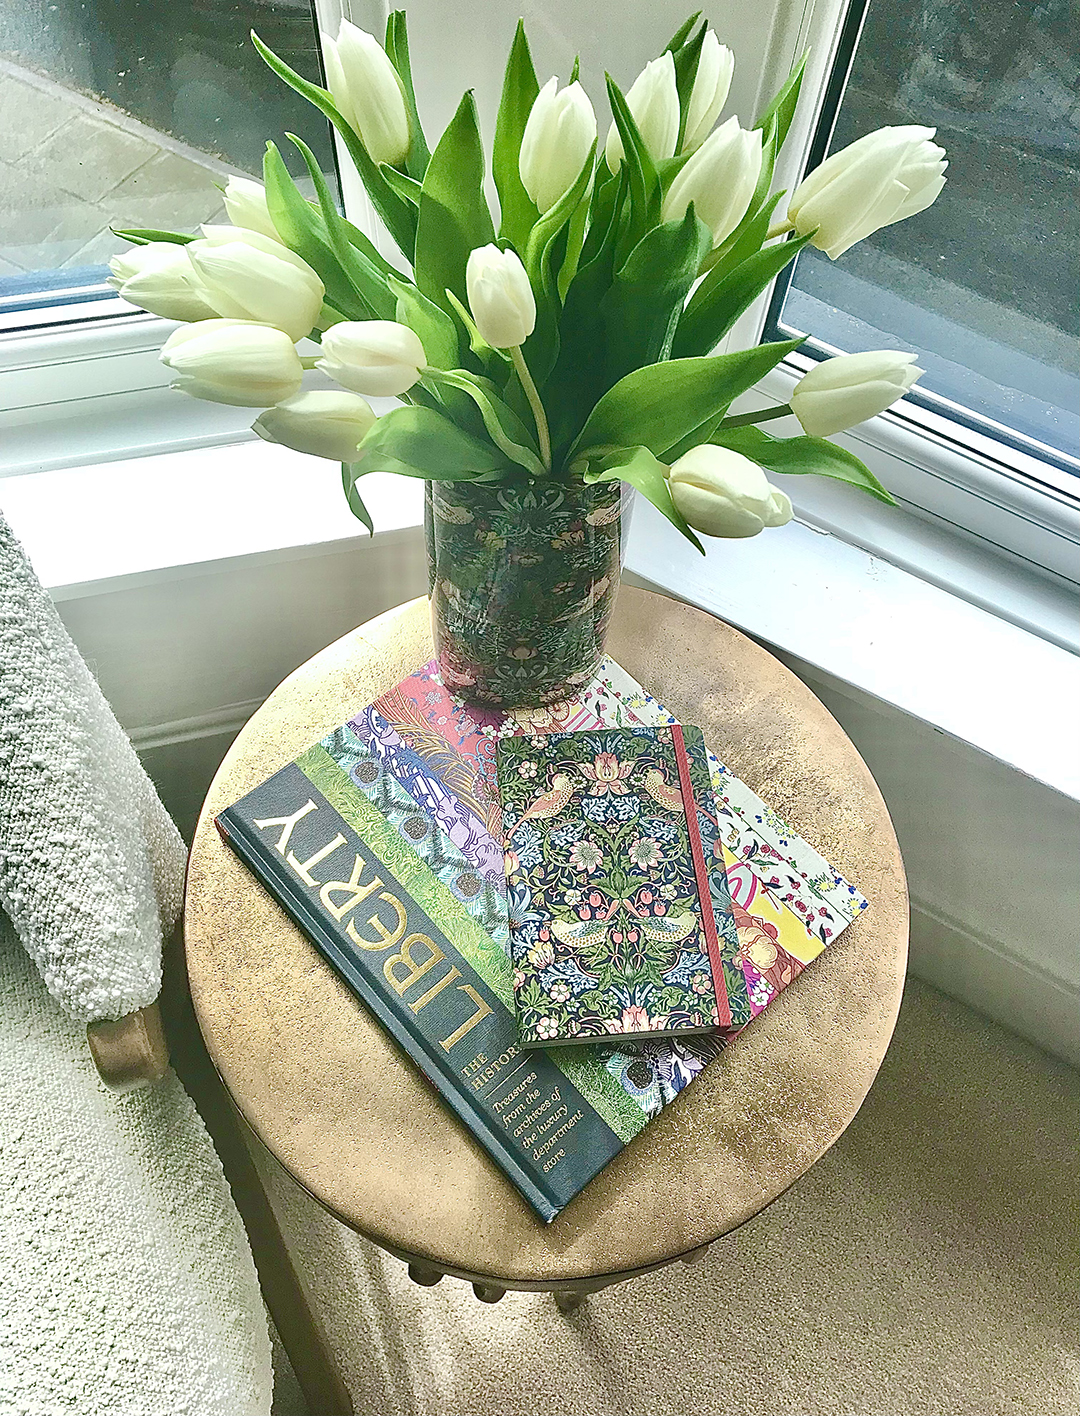 Liberty multicoloured book on table with tulips